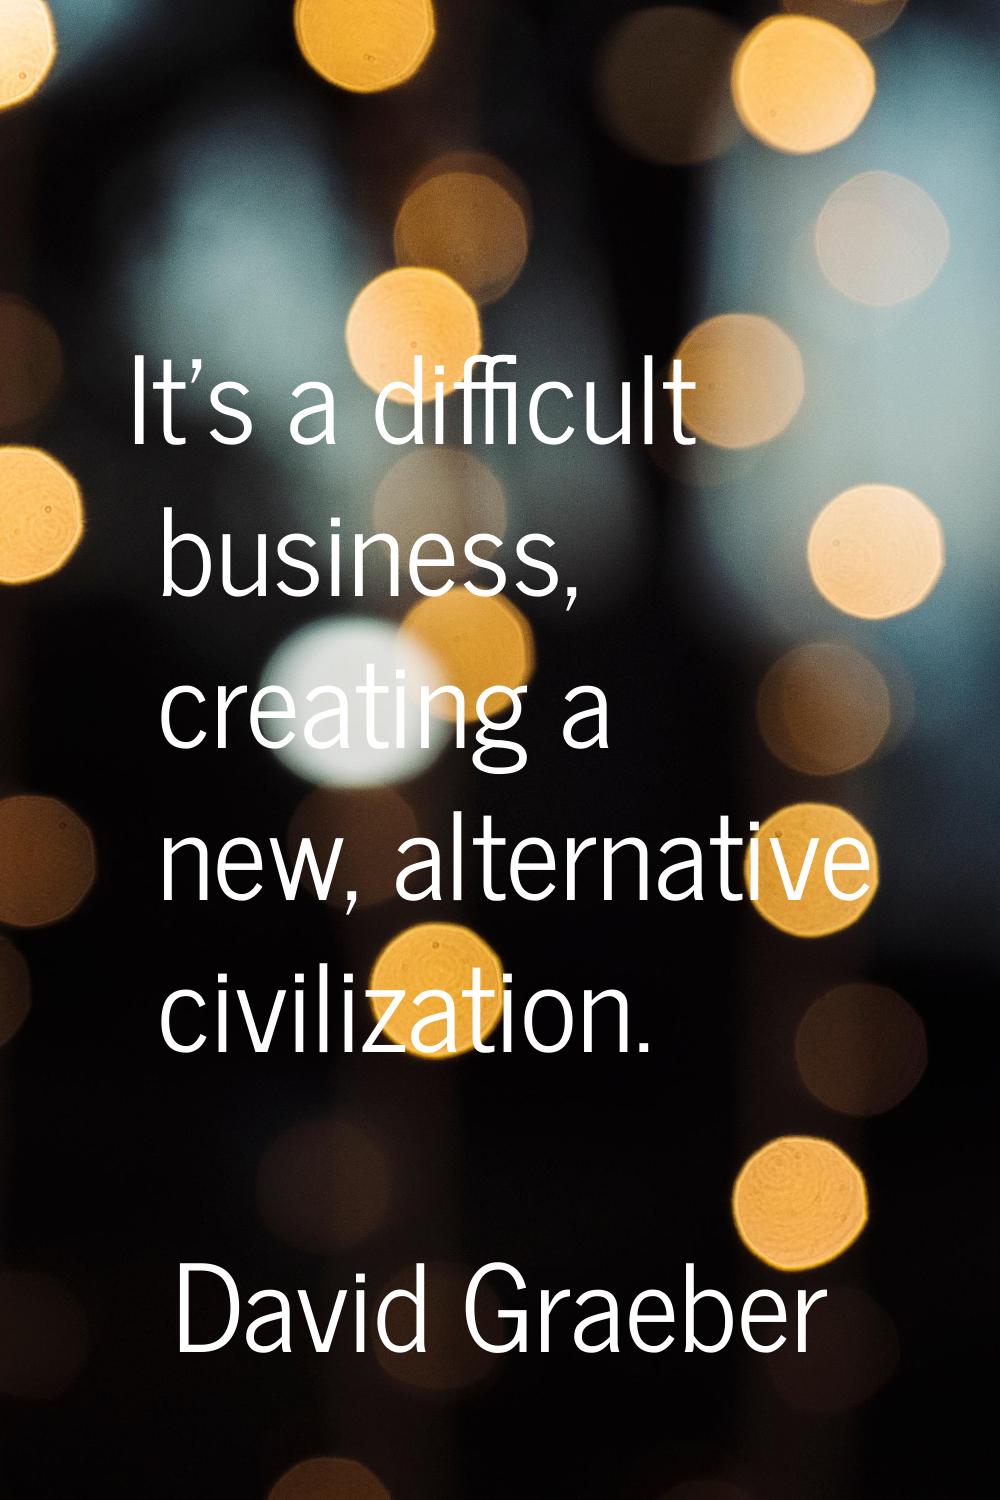 It's a difficult business, creating a new, alternative civilization.